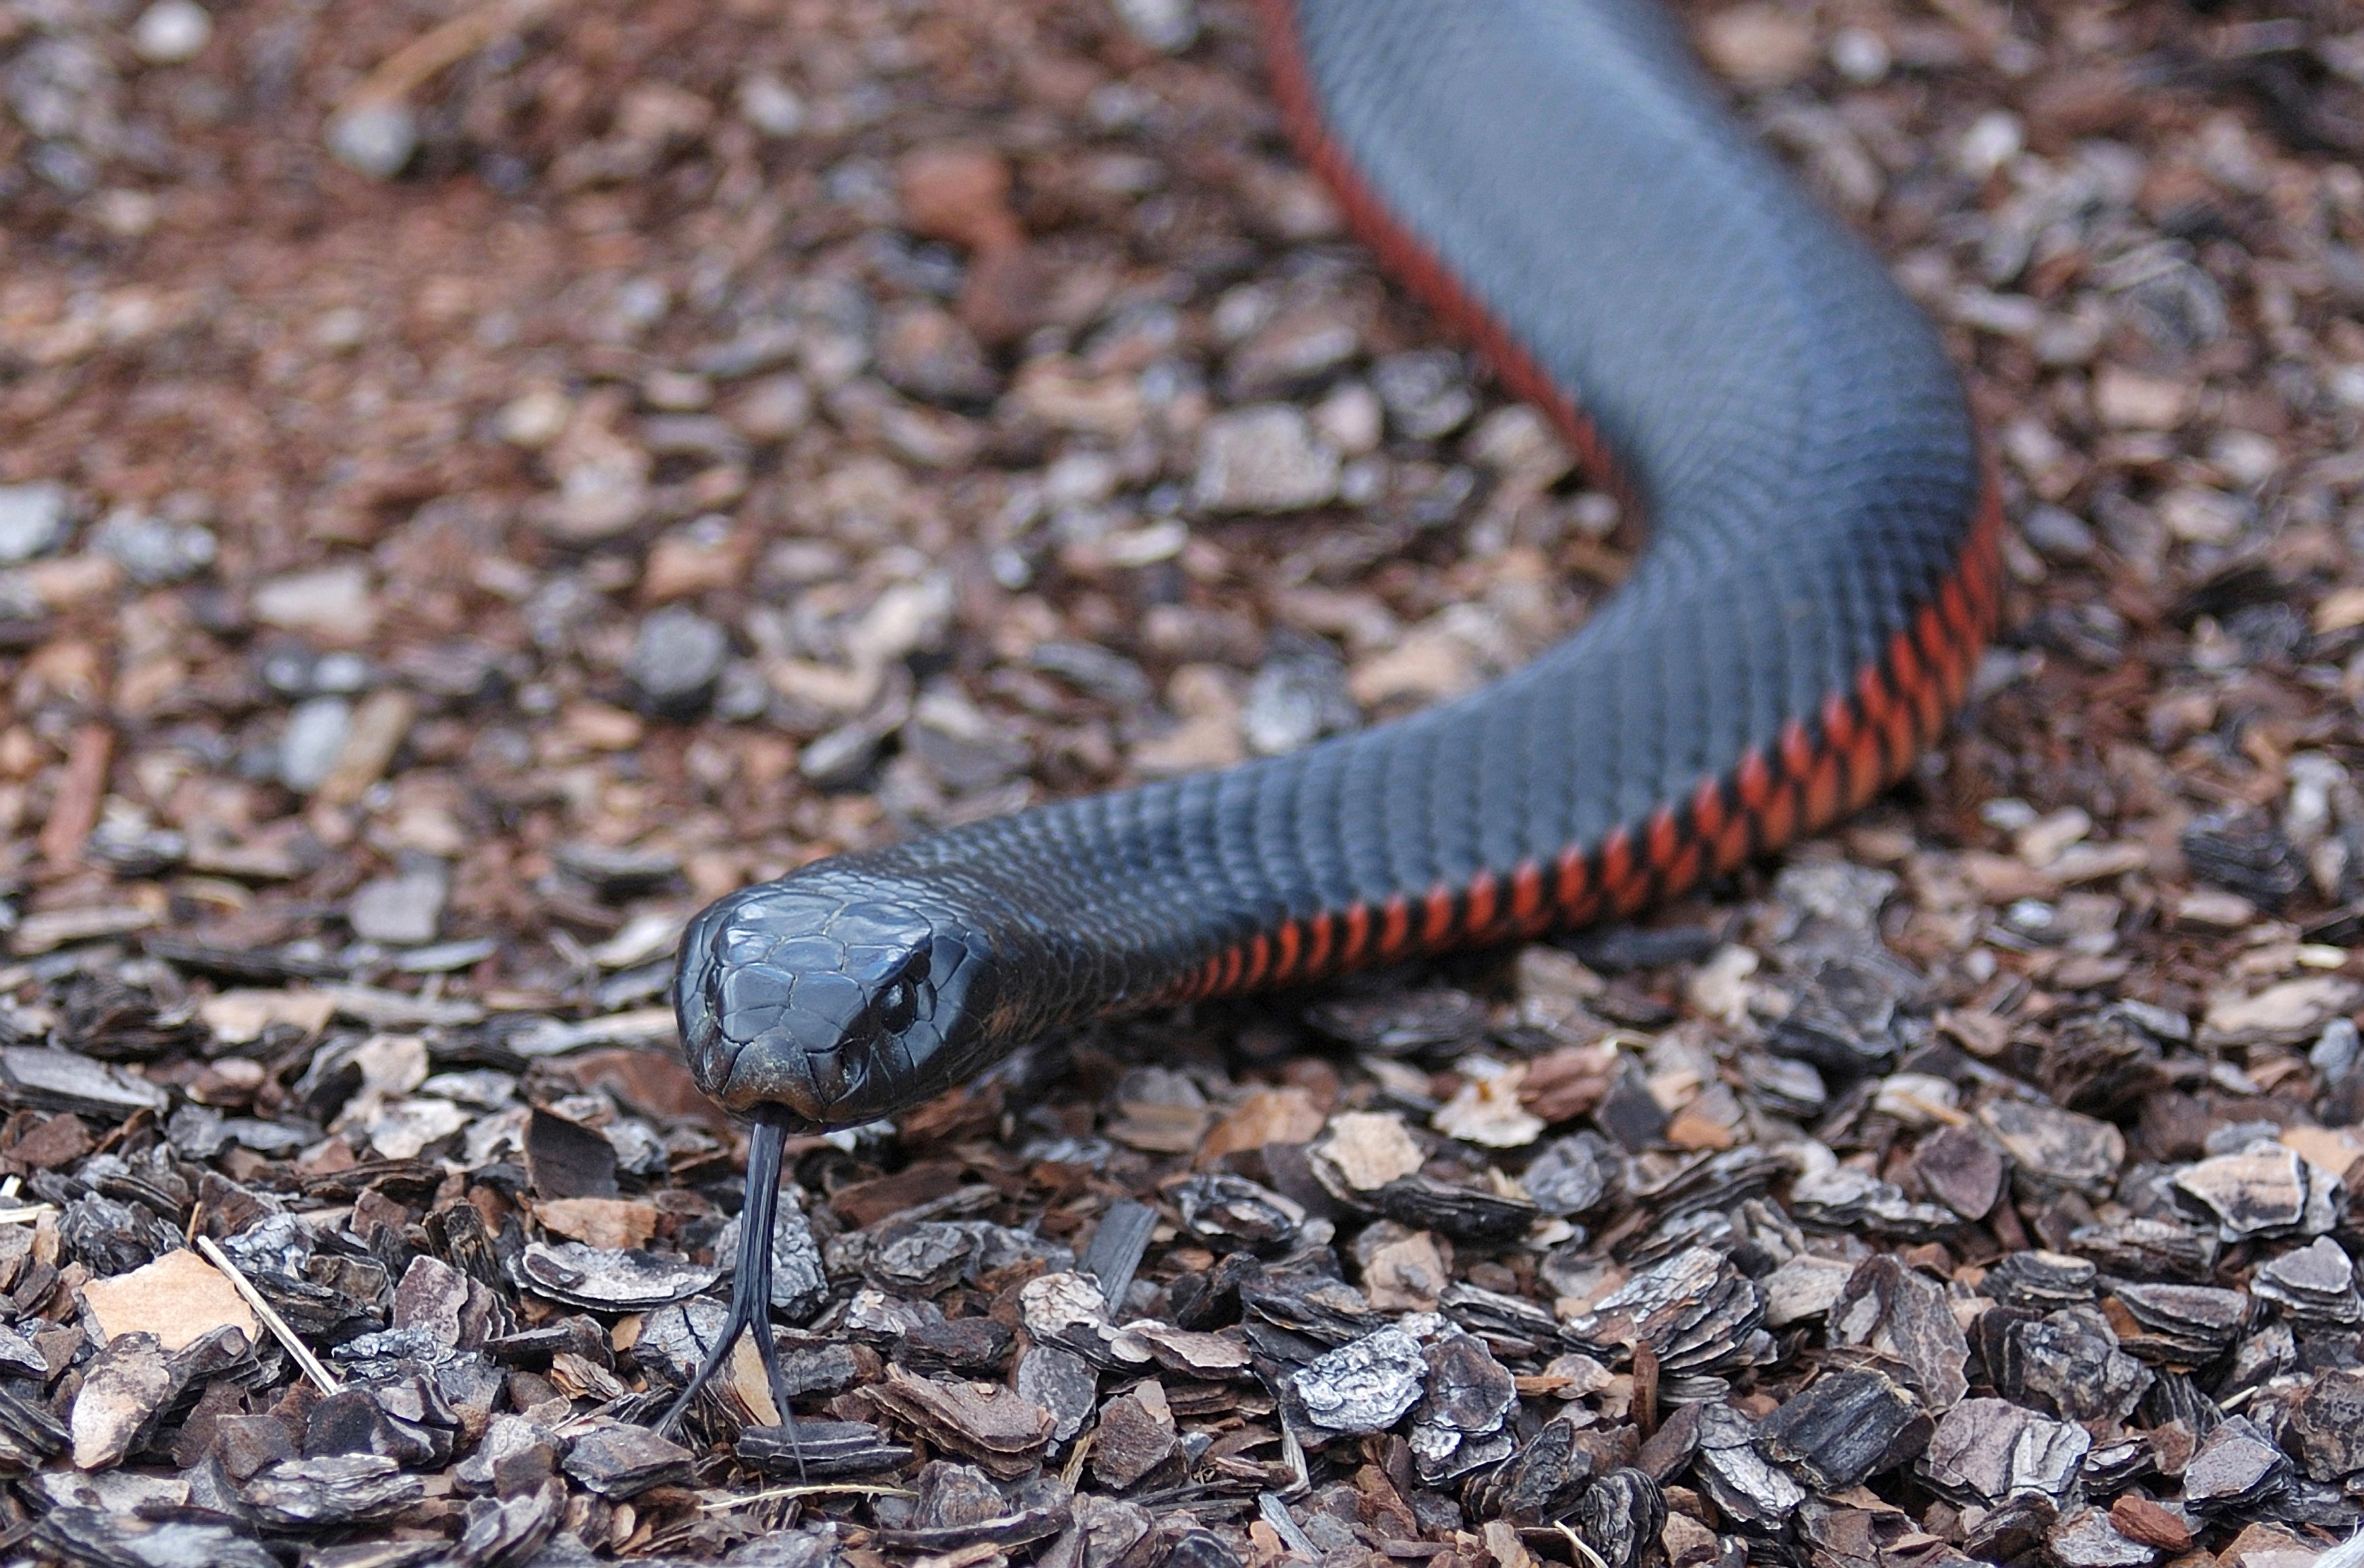 The red-bellied black snake is venomous but has not been responsible for any deaths in Australia